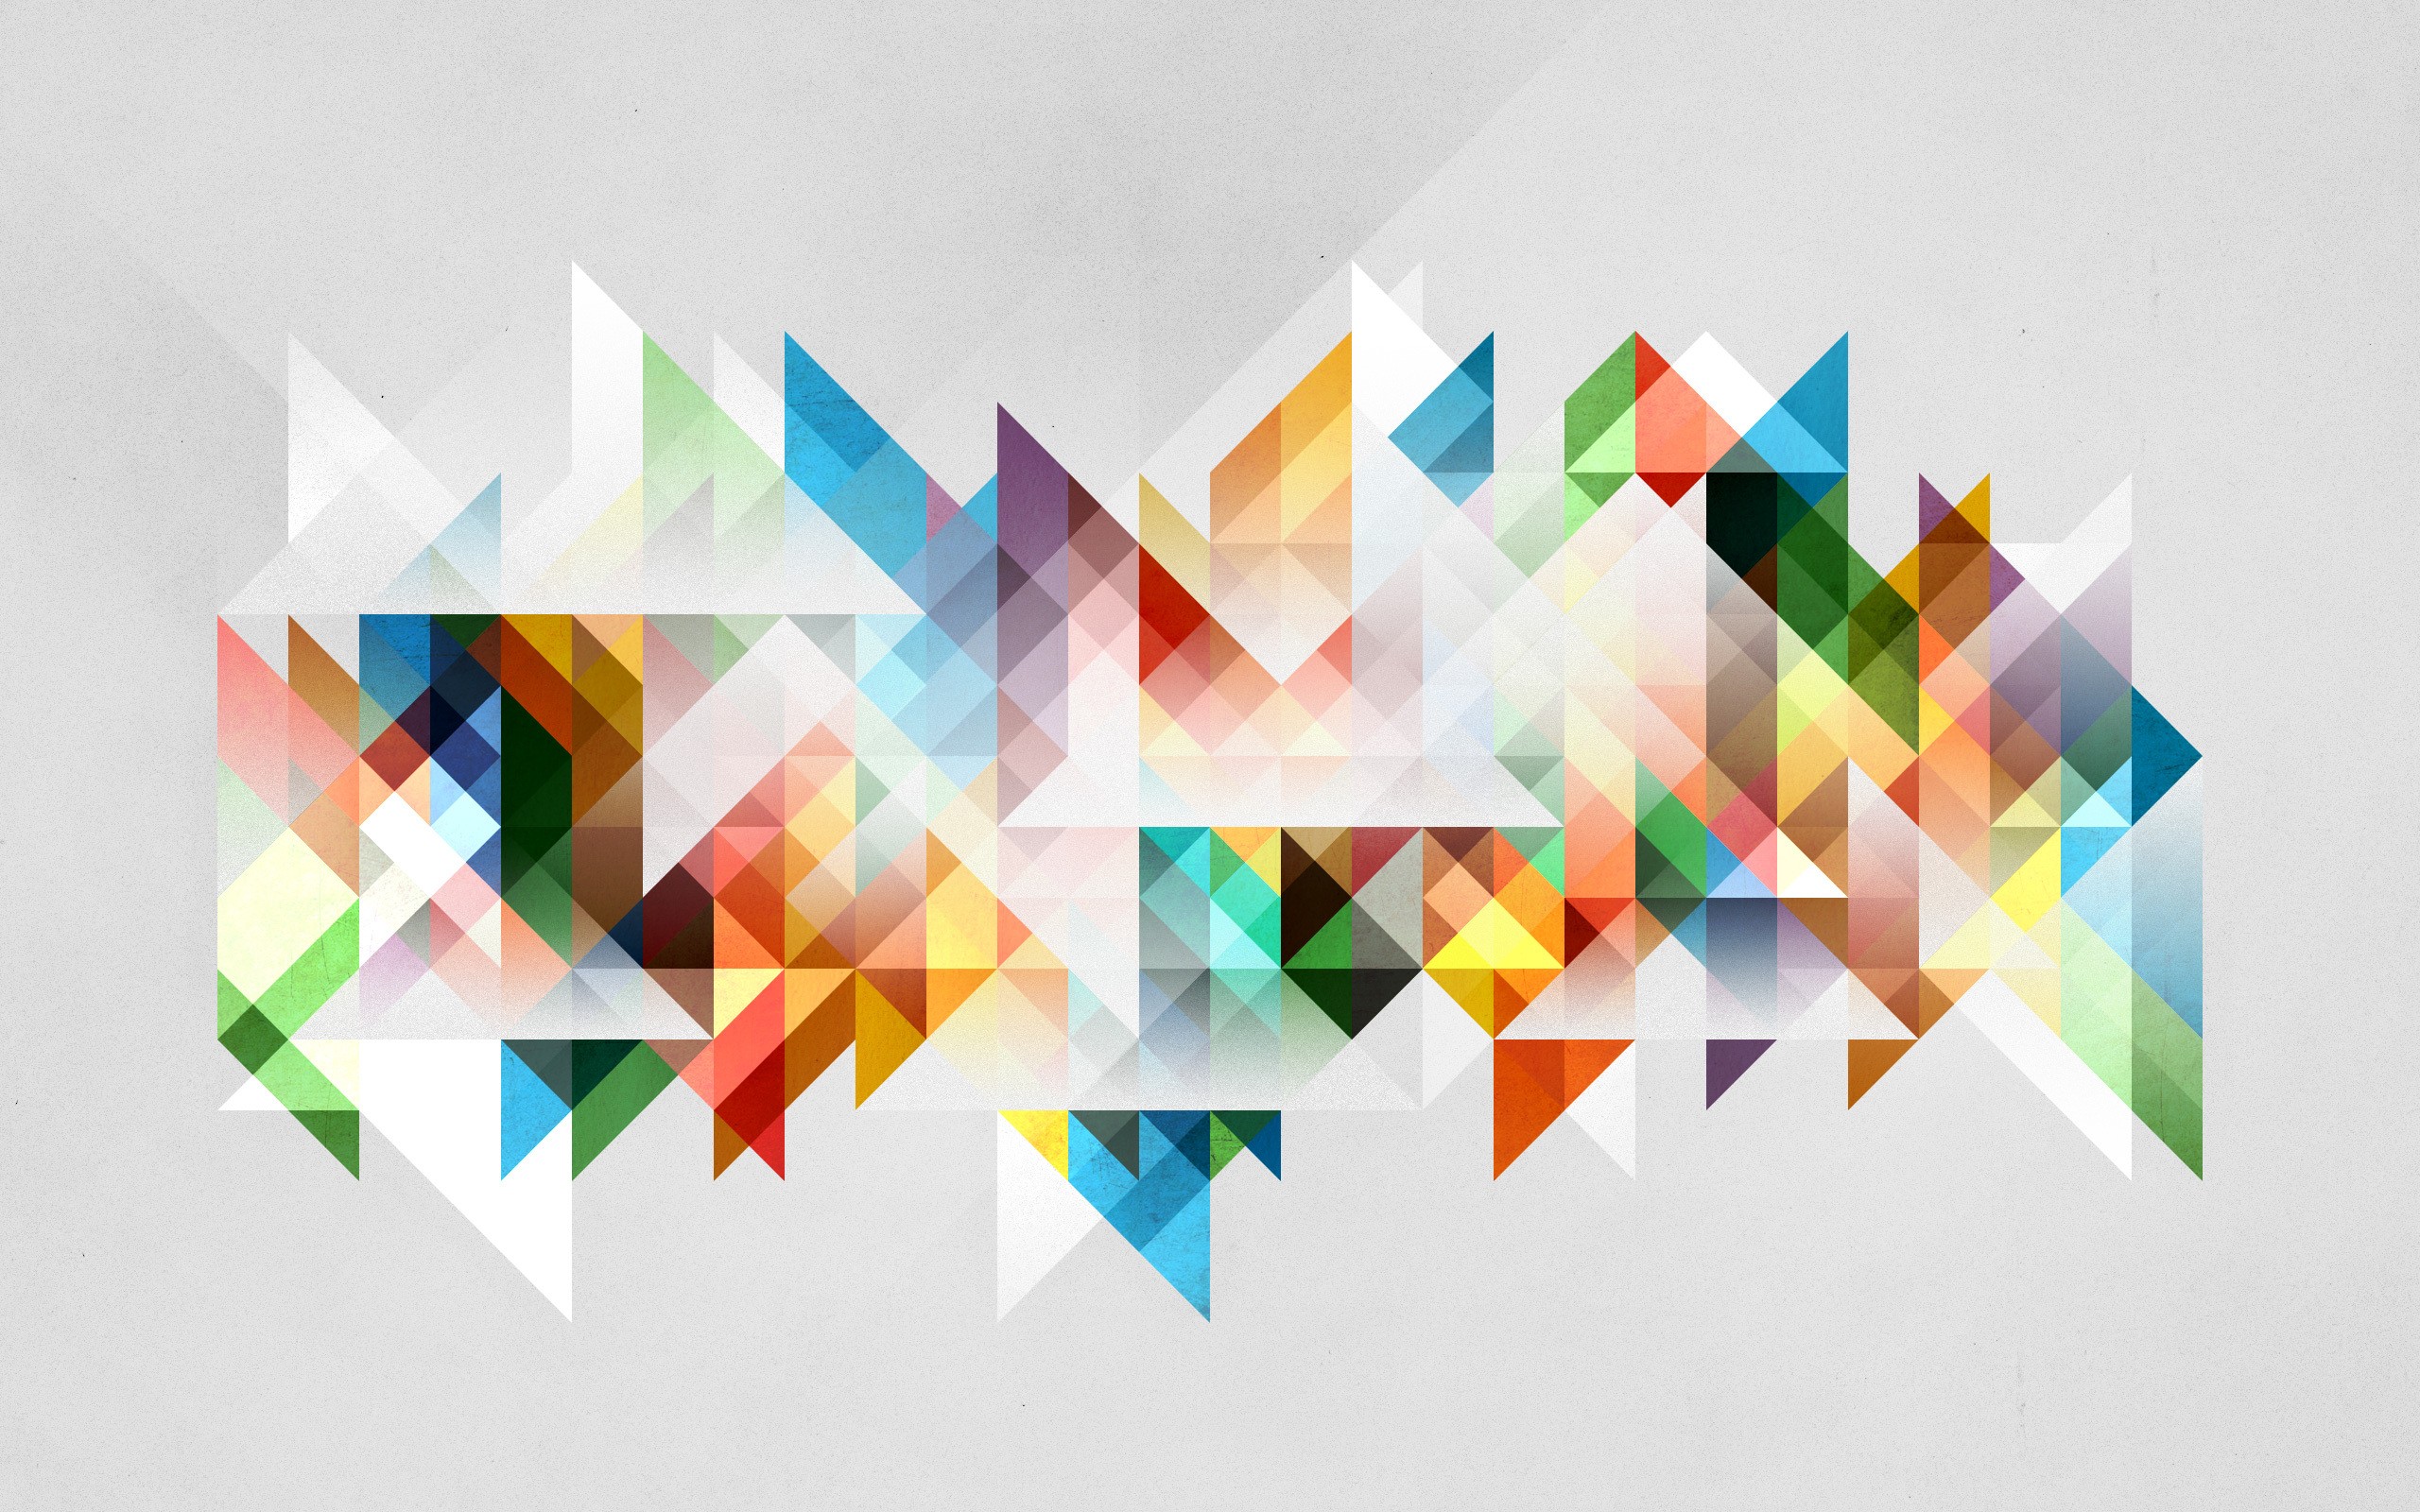 Wallpaper, colorful, illustration, abstract, symmetry, triangle, circle, shapes, ART, color, wheel, shape, design, line, font, origami paper, art paper 2560x1600